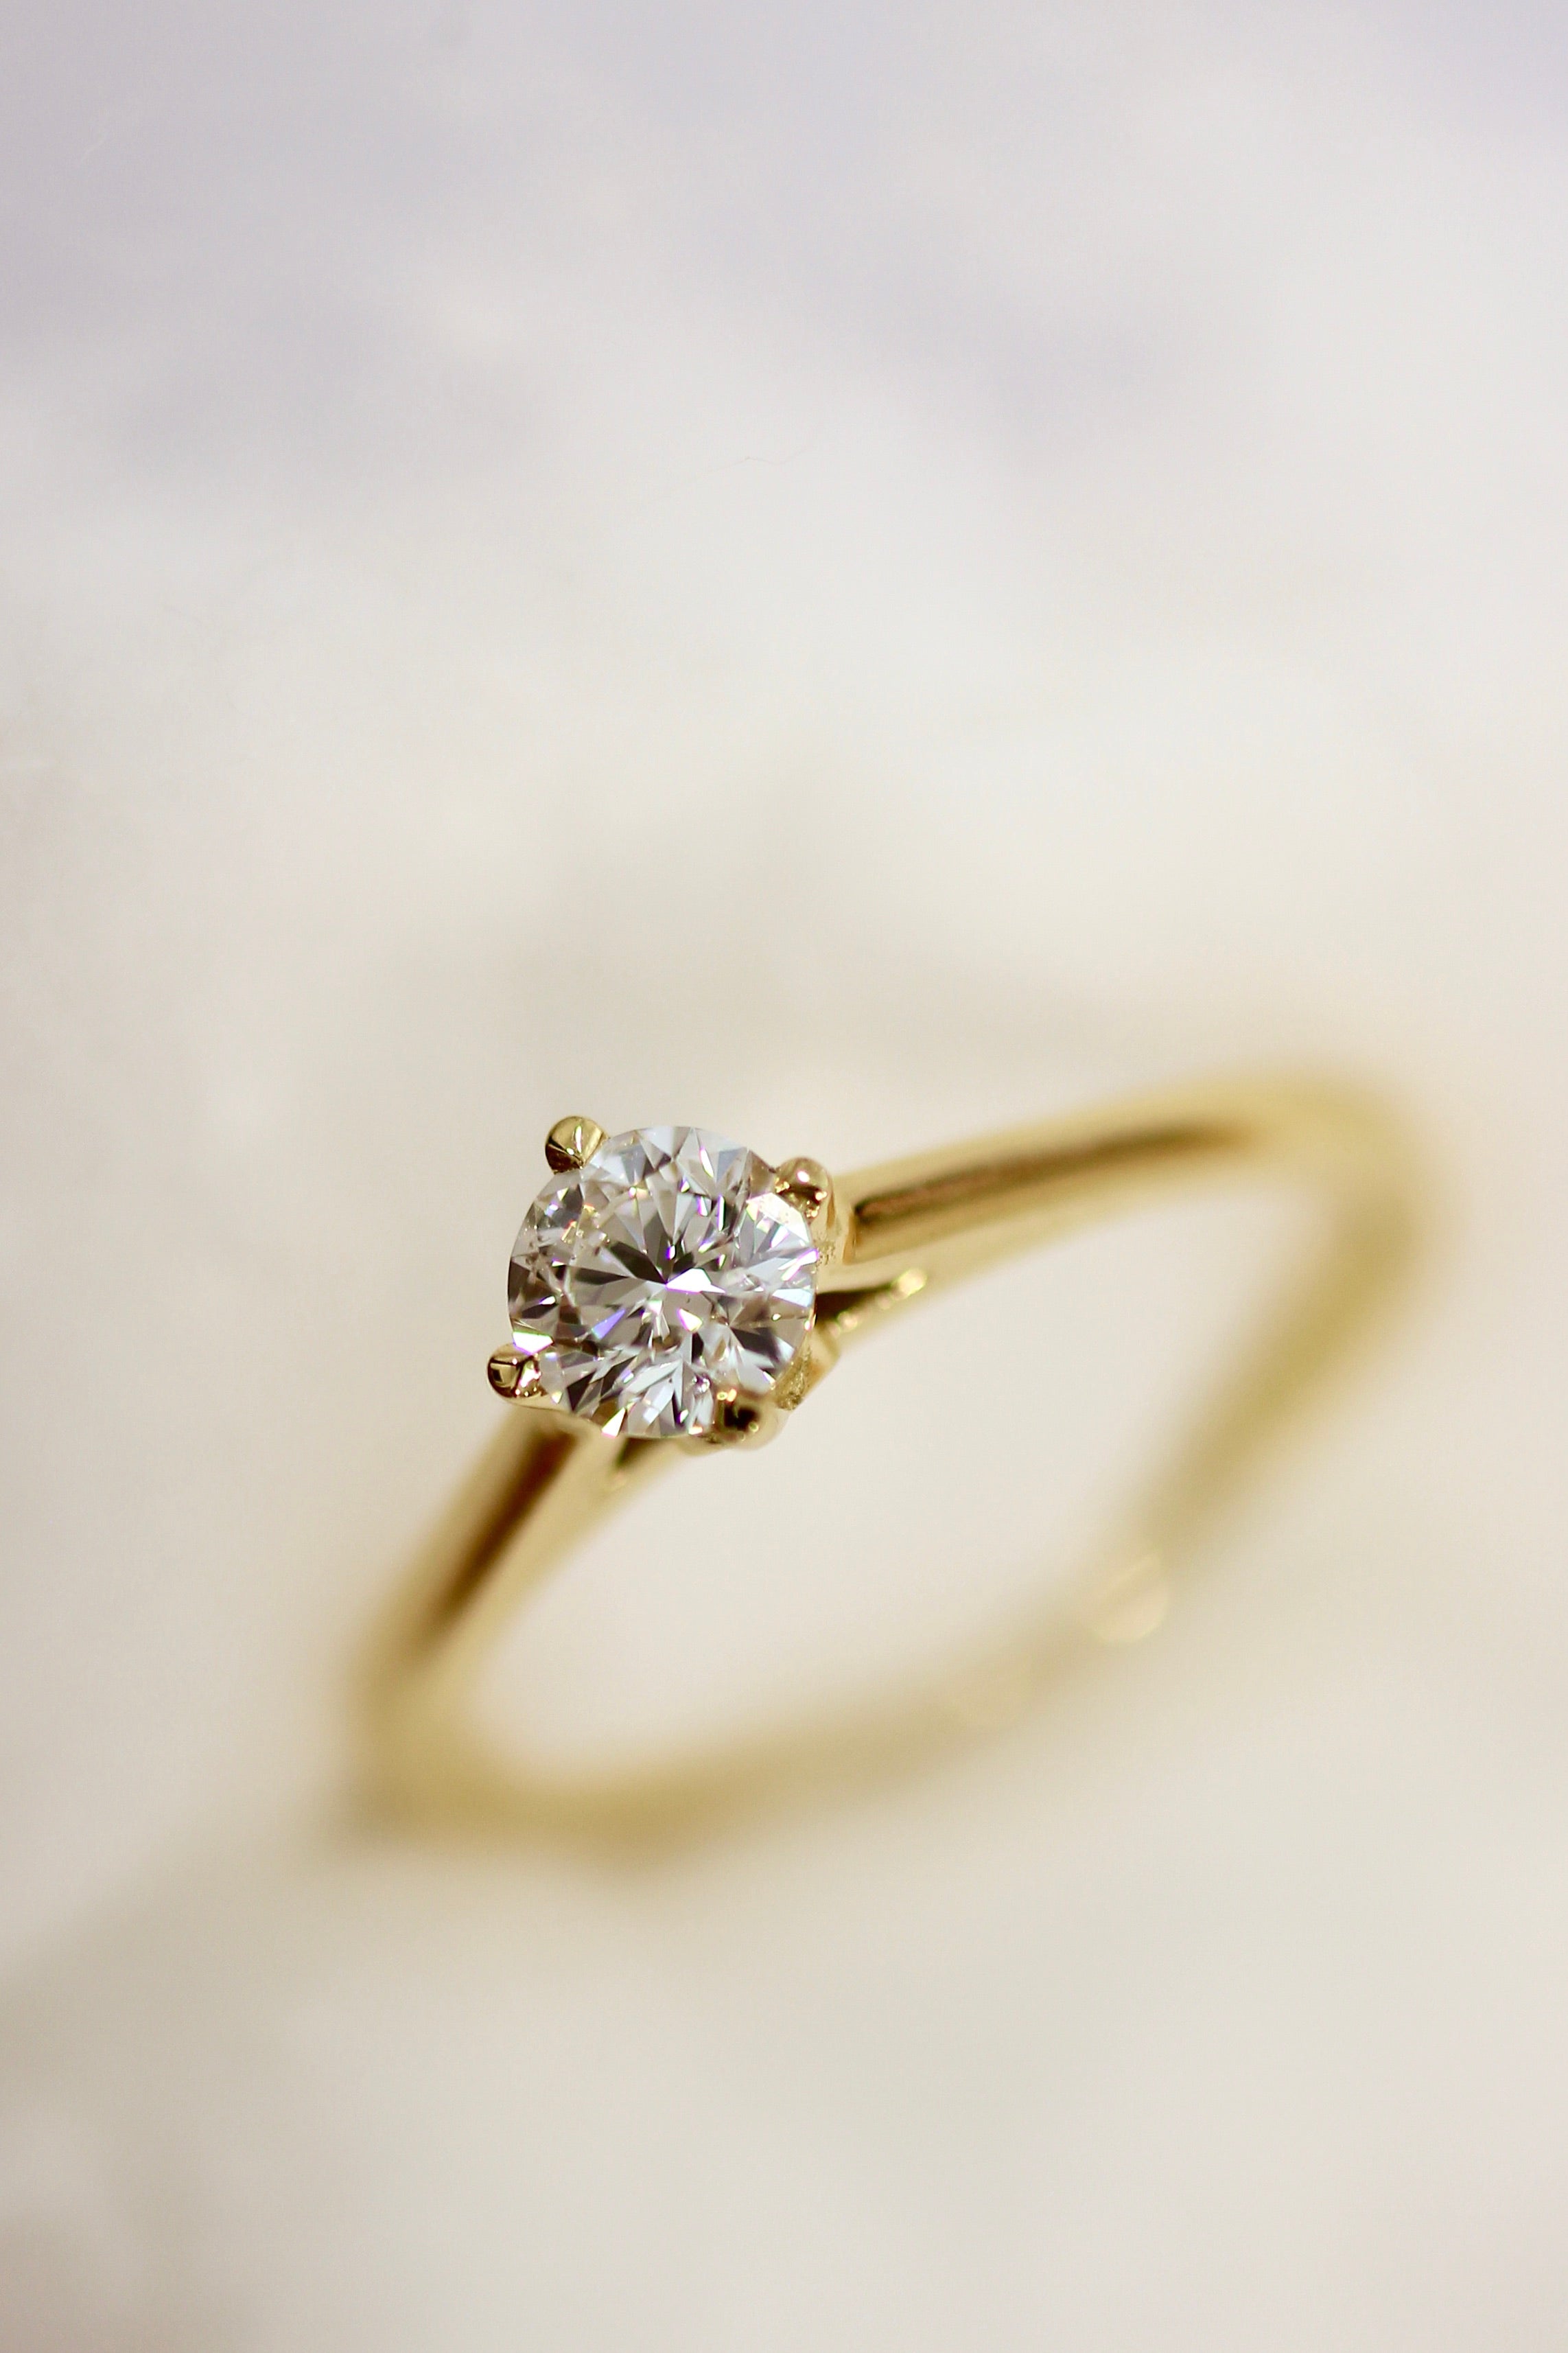 Ring-a-Ding-Diamond! Why should you invest in a Gold Engagement ring?